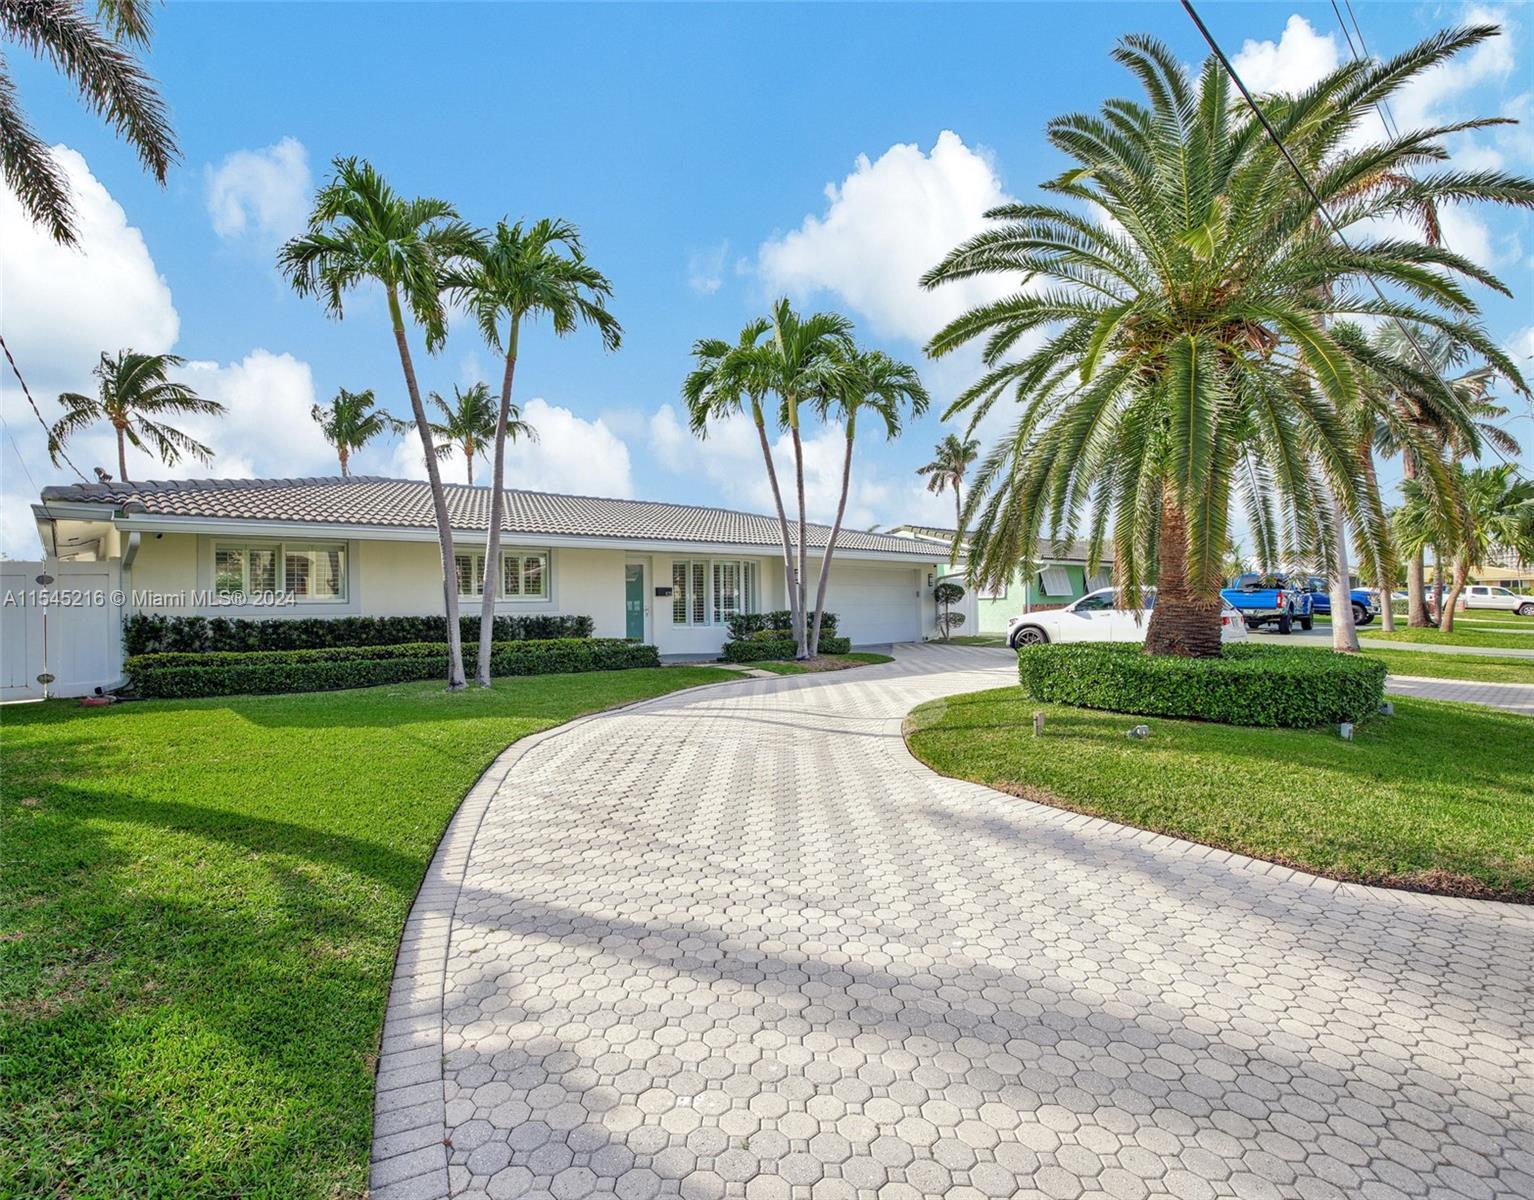 Outstanding location within "Harbor Village Island" gated community. Recently renovated to perfectio